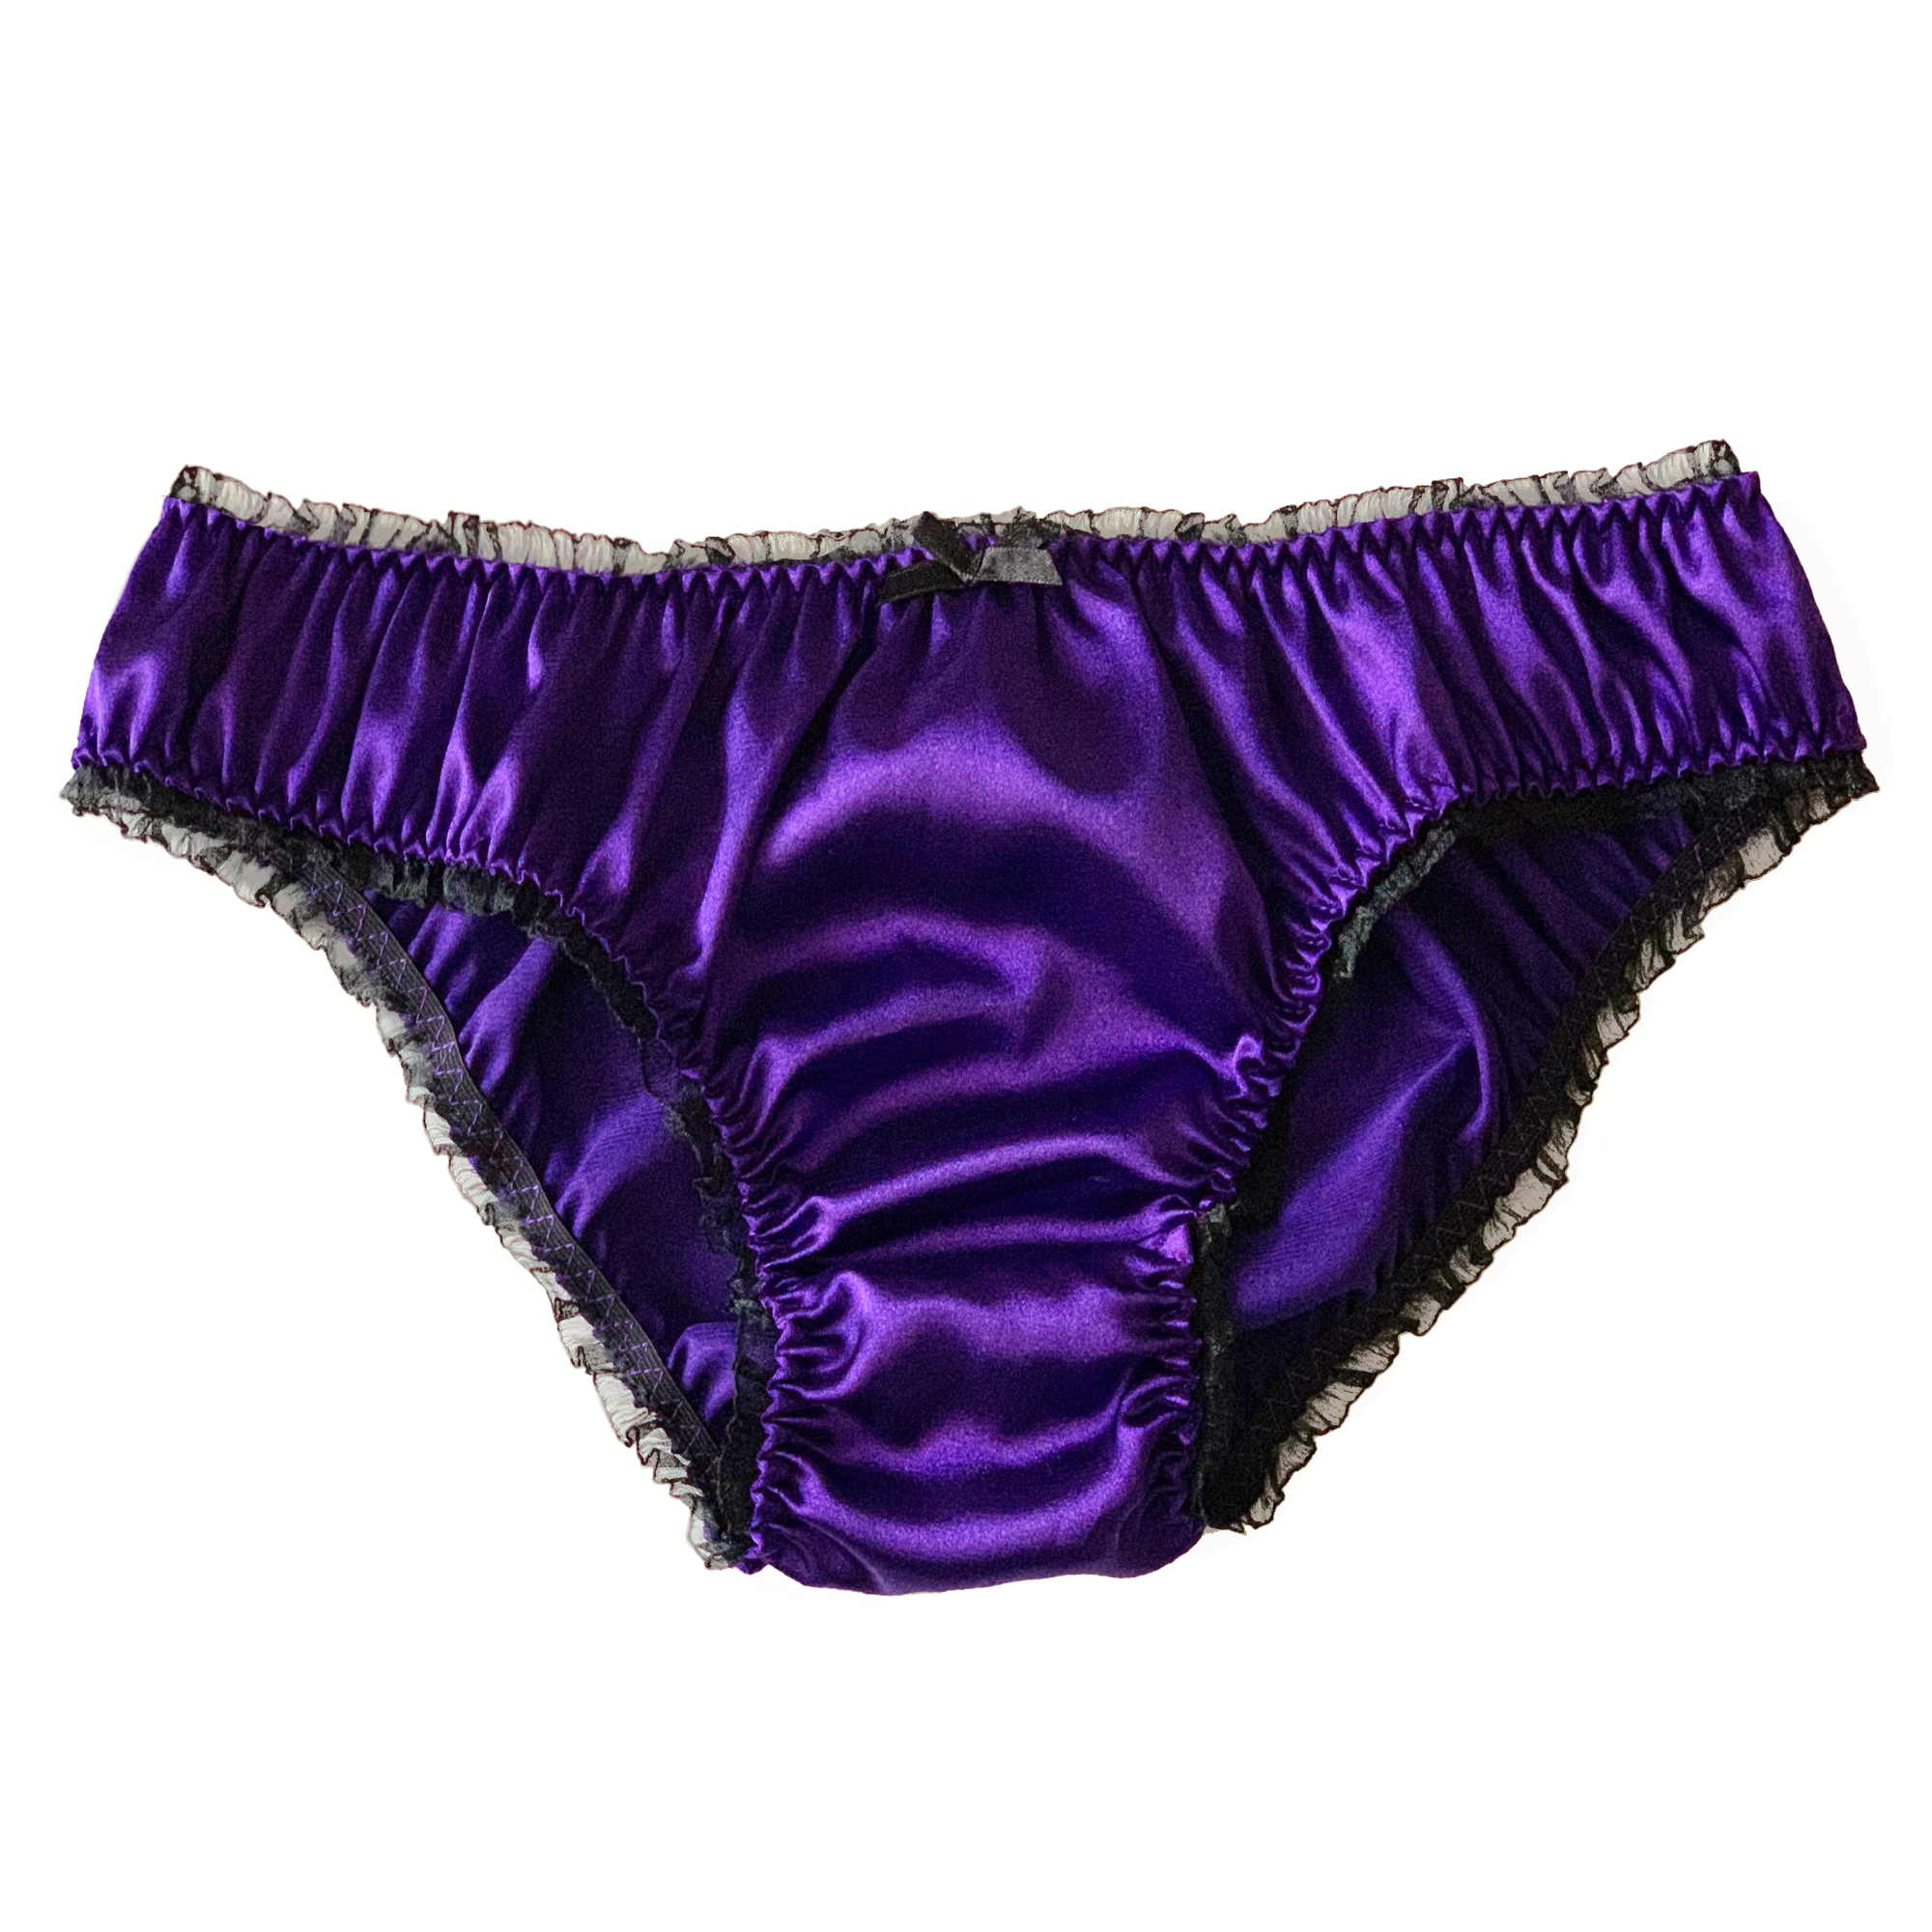 Violet Satin French Knickers Sous-vêtements Sissy satin culotte Taille 22/24 